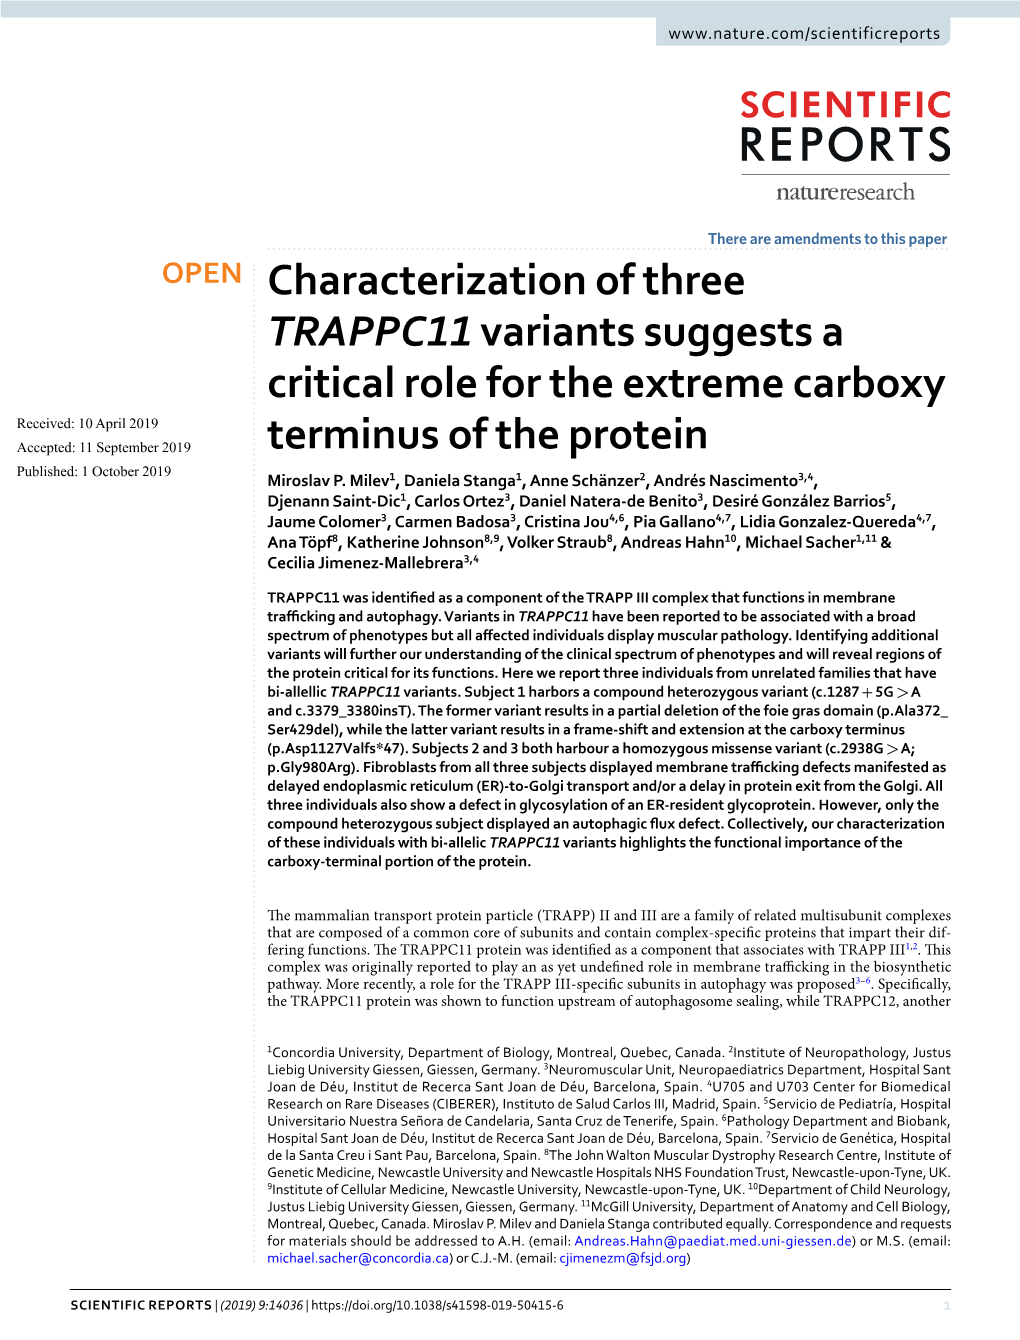 Characterization of Three TRAPPC11 Variants Suggests a Critical Role For